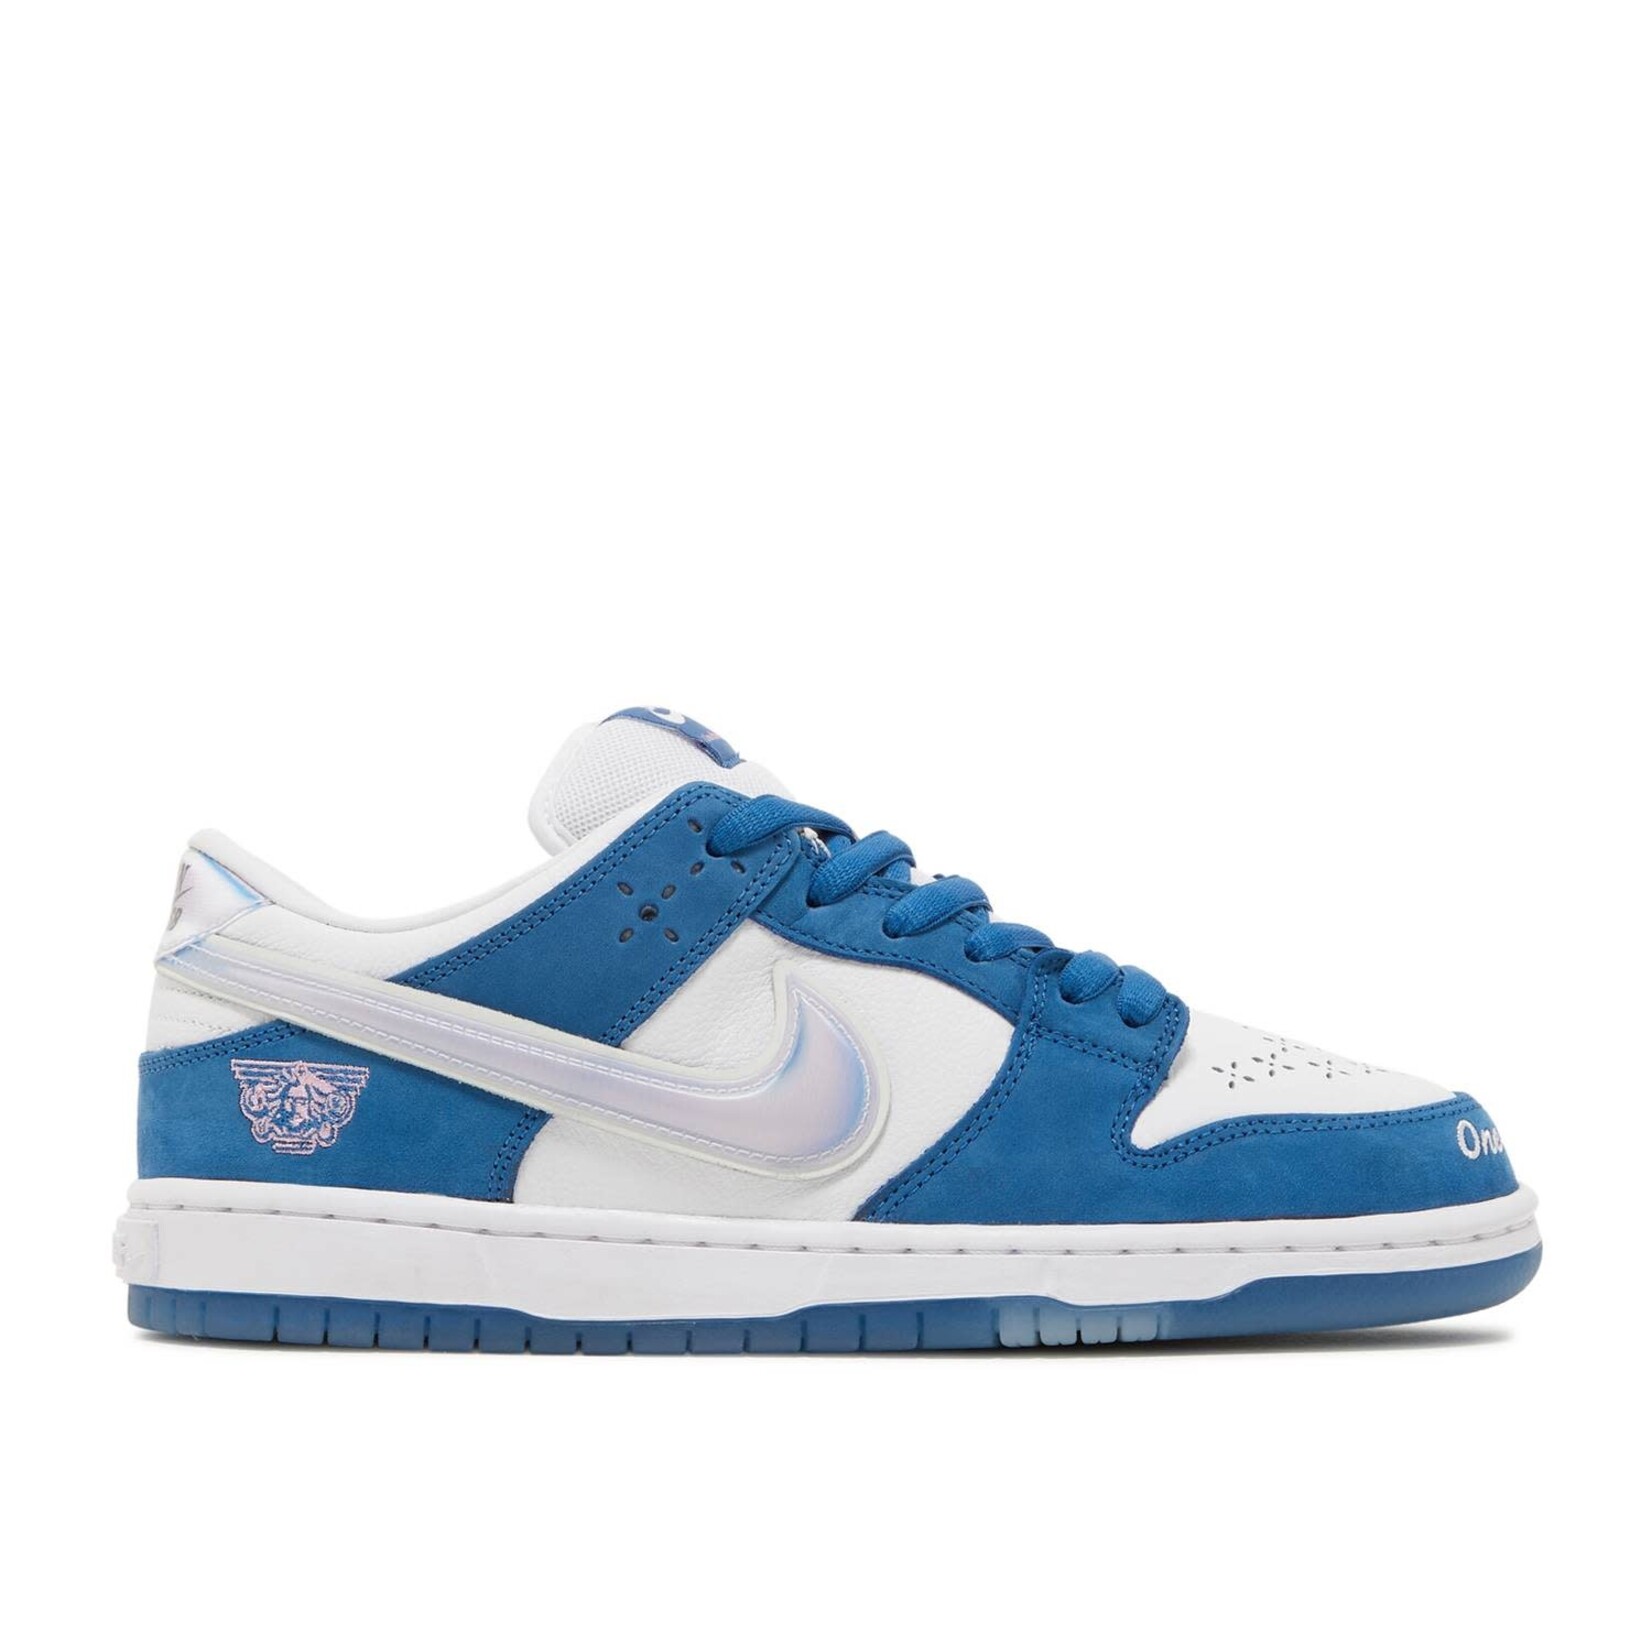 Nike Nike SB Dunk Low Born X Raised One Block At A Time Size 10, DS BRAND NEW DAMAGED BOX